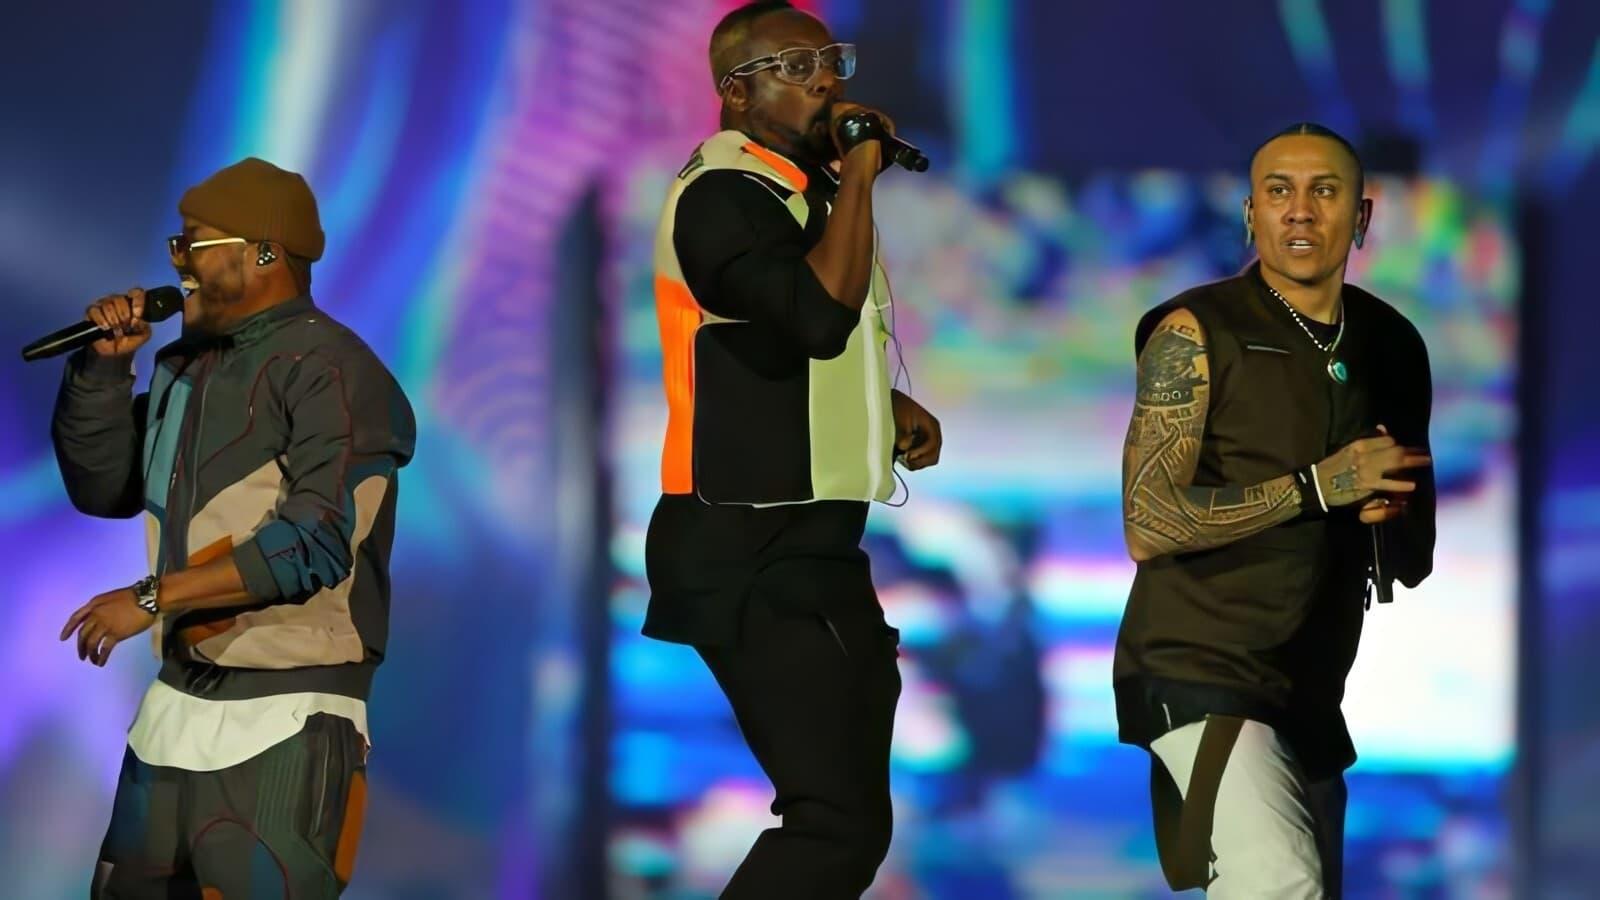 Black Eyed Peas: Live at Rock in Rio backdrop